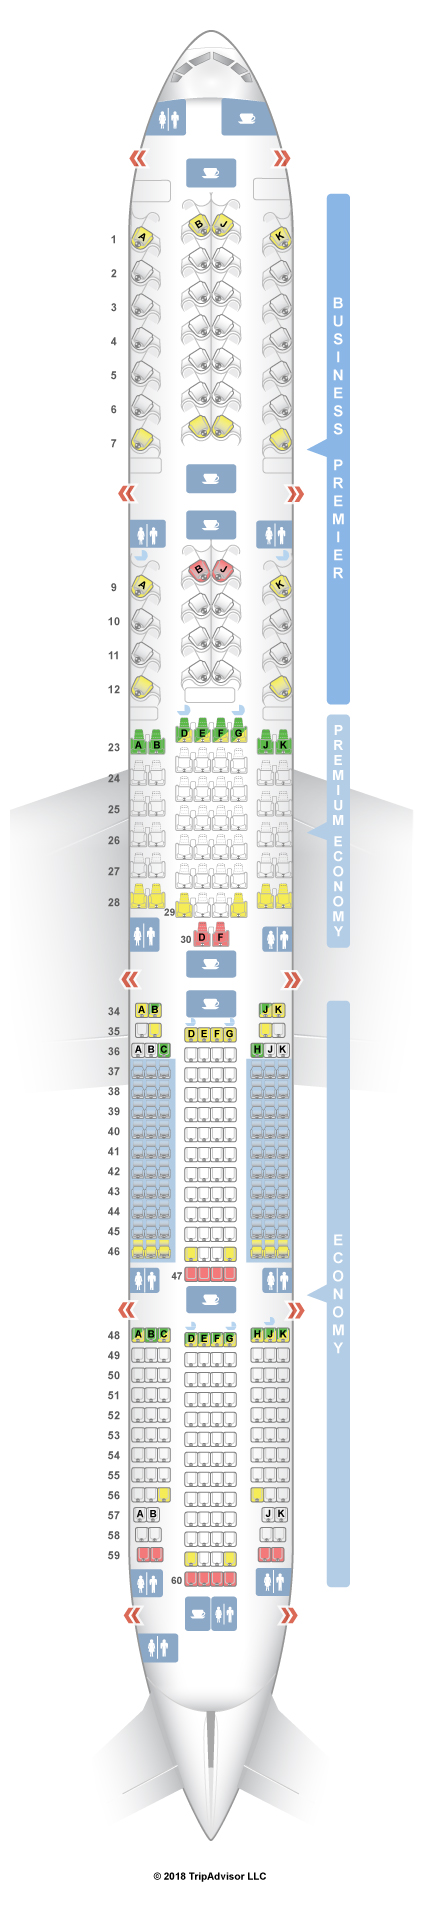 Boeing 777 300er Seating Chart Air New Zealand